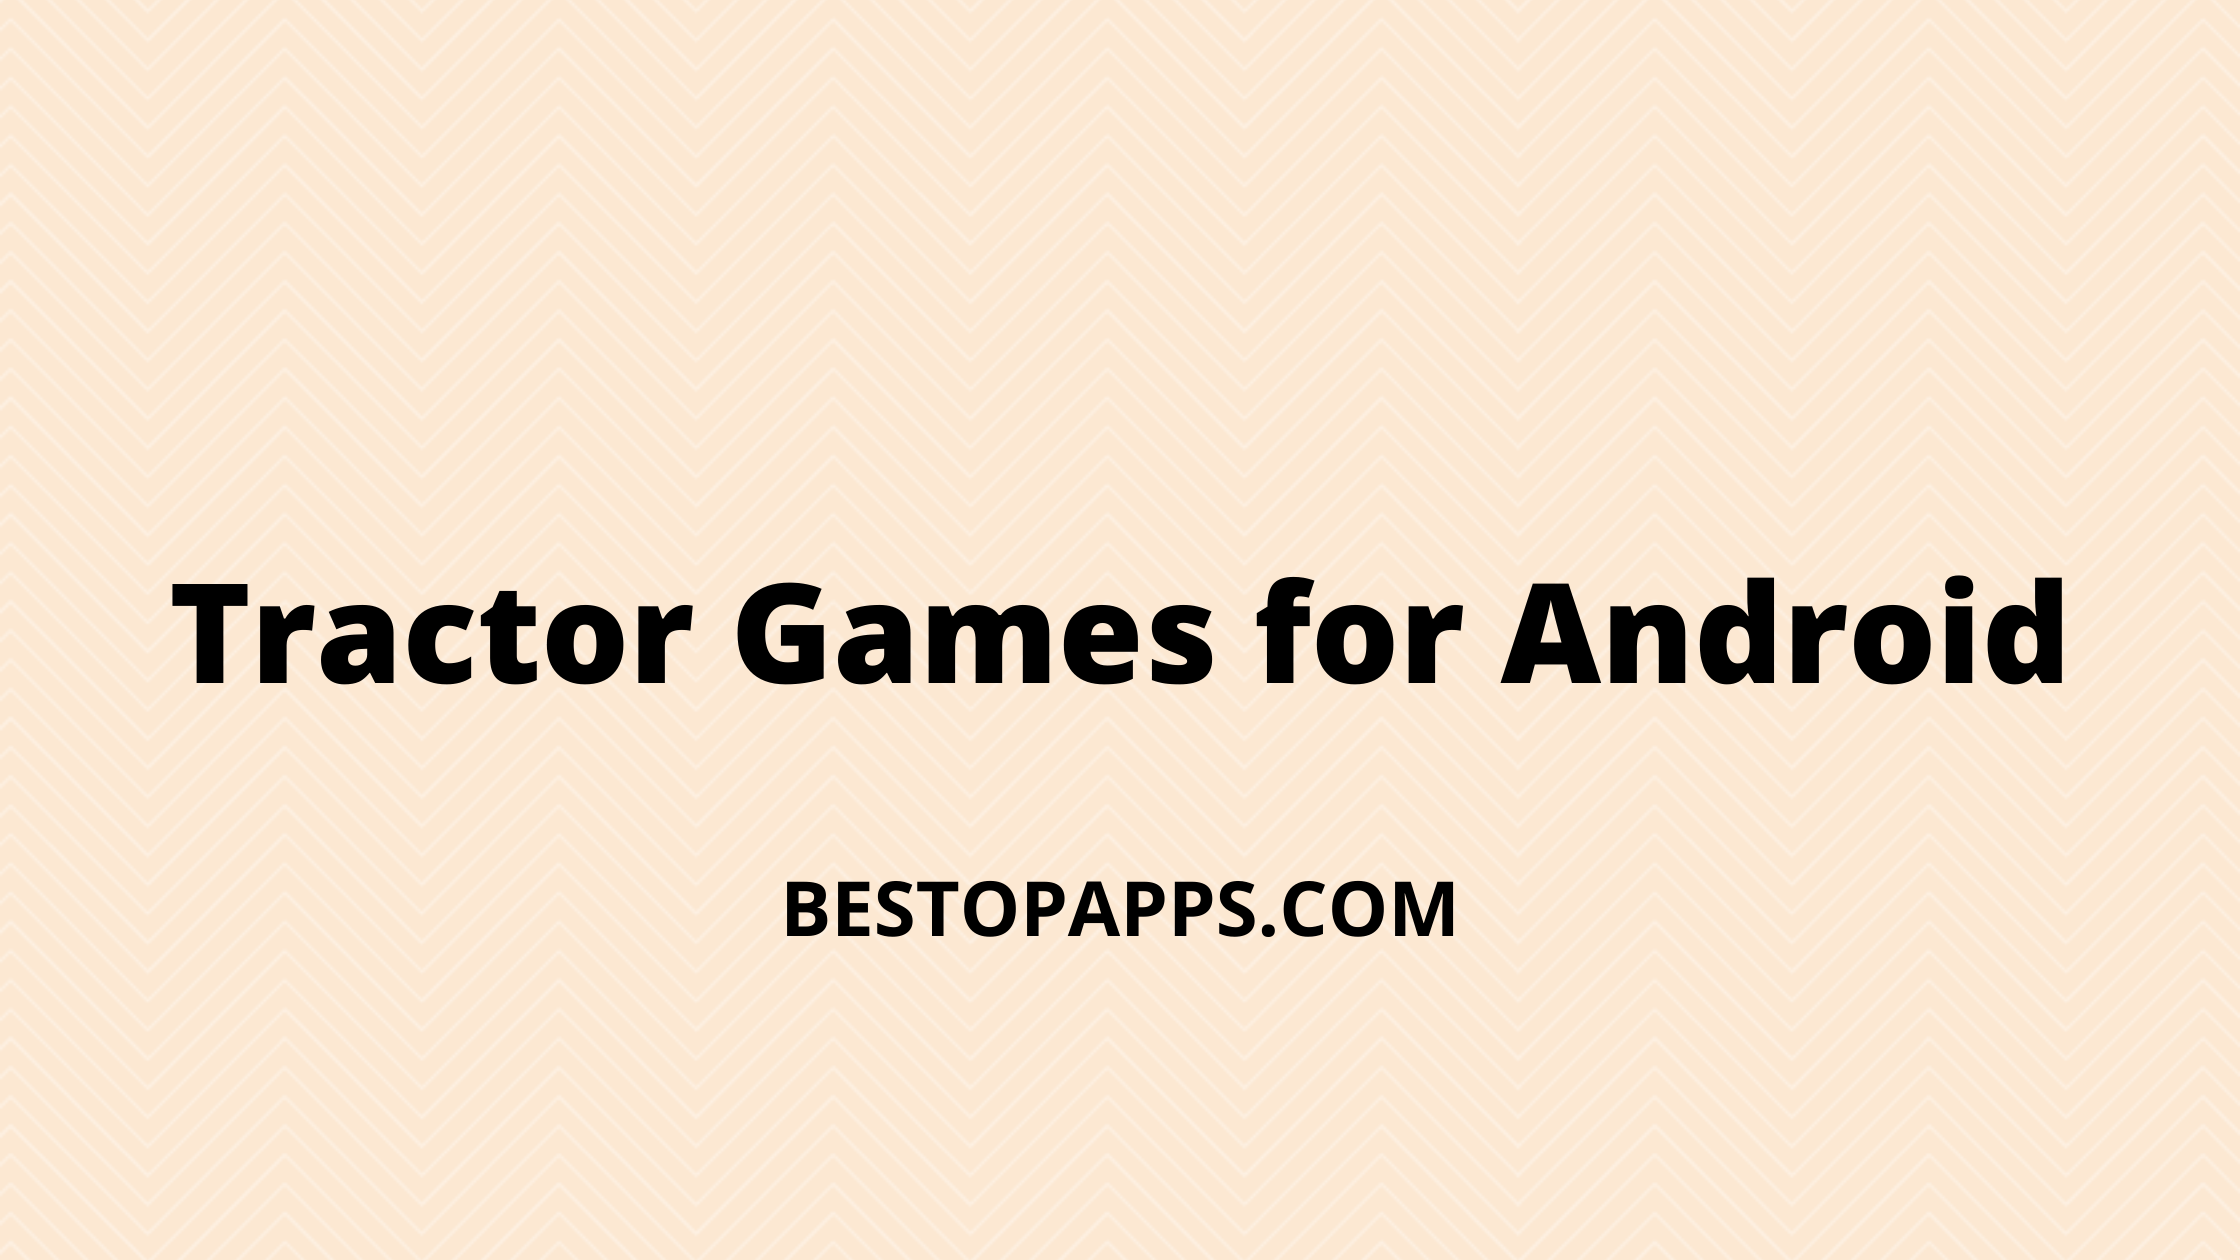 Tractor Games for Android